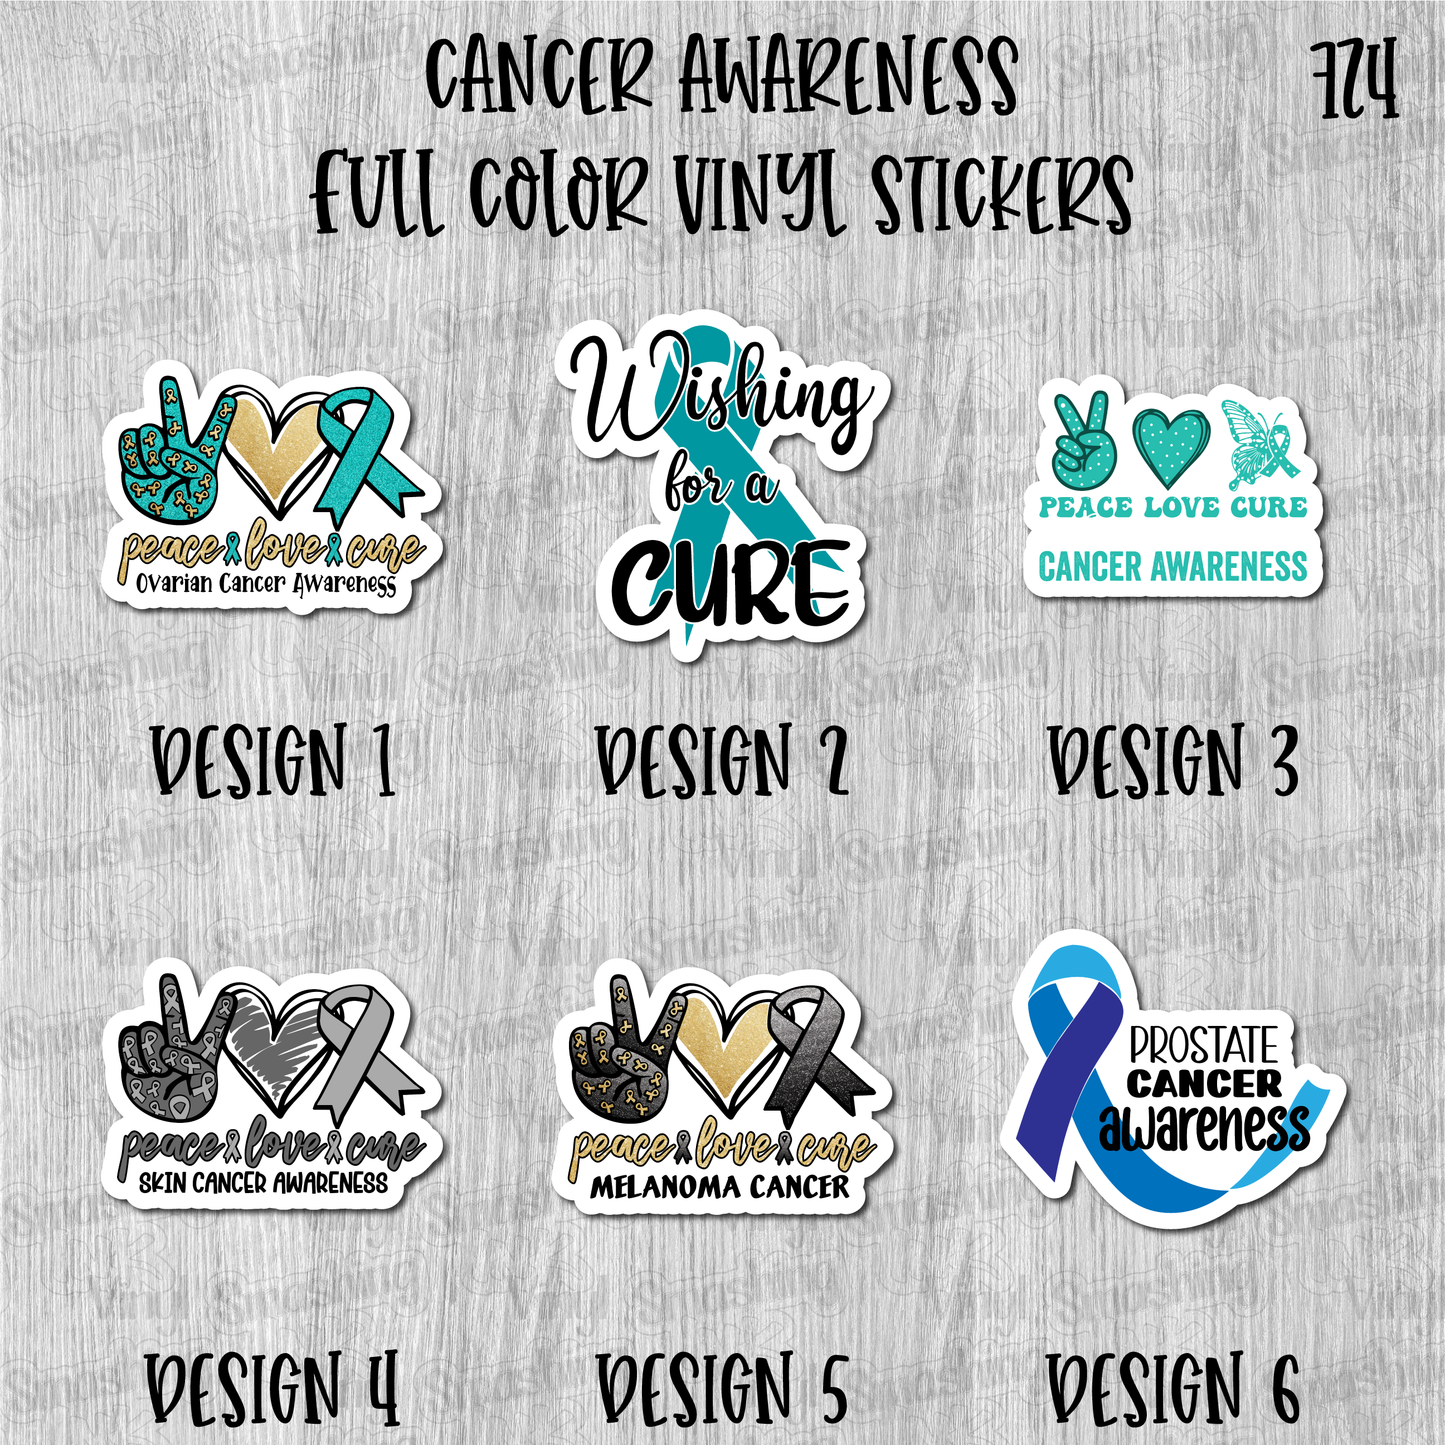 Cancer Awareness - Full Color Vinyl Stickers (SHIPS IN 3-7 BUS DAYS)